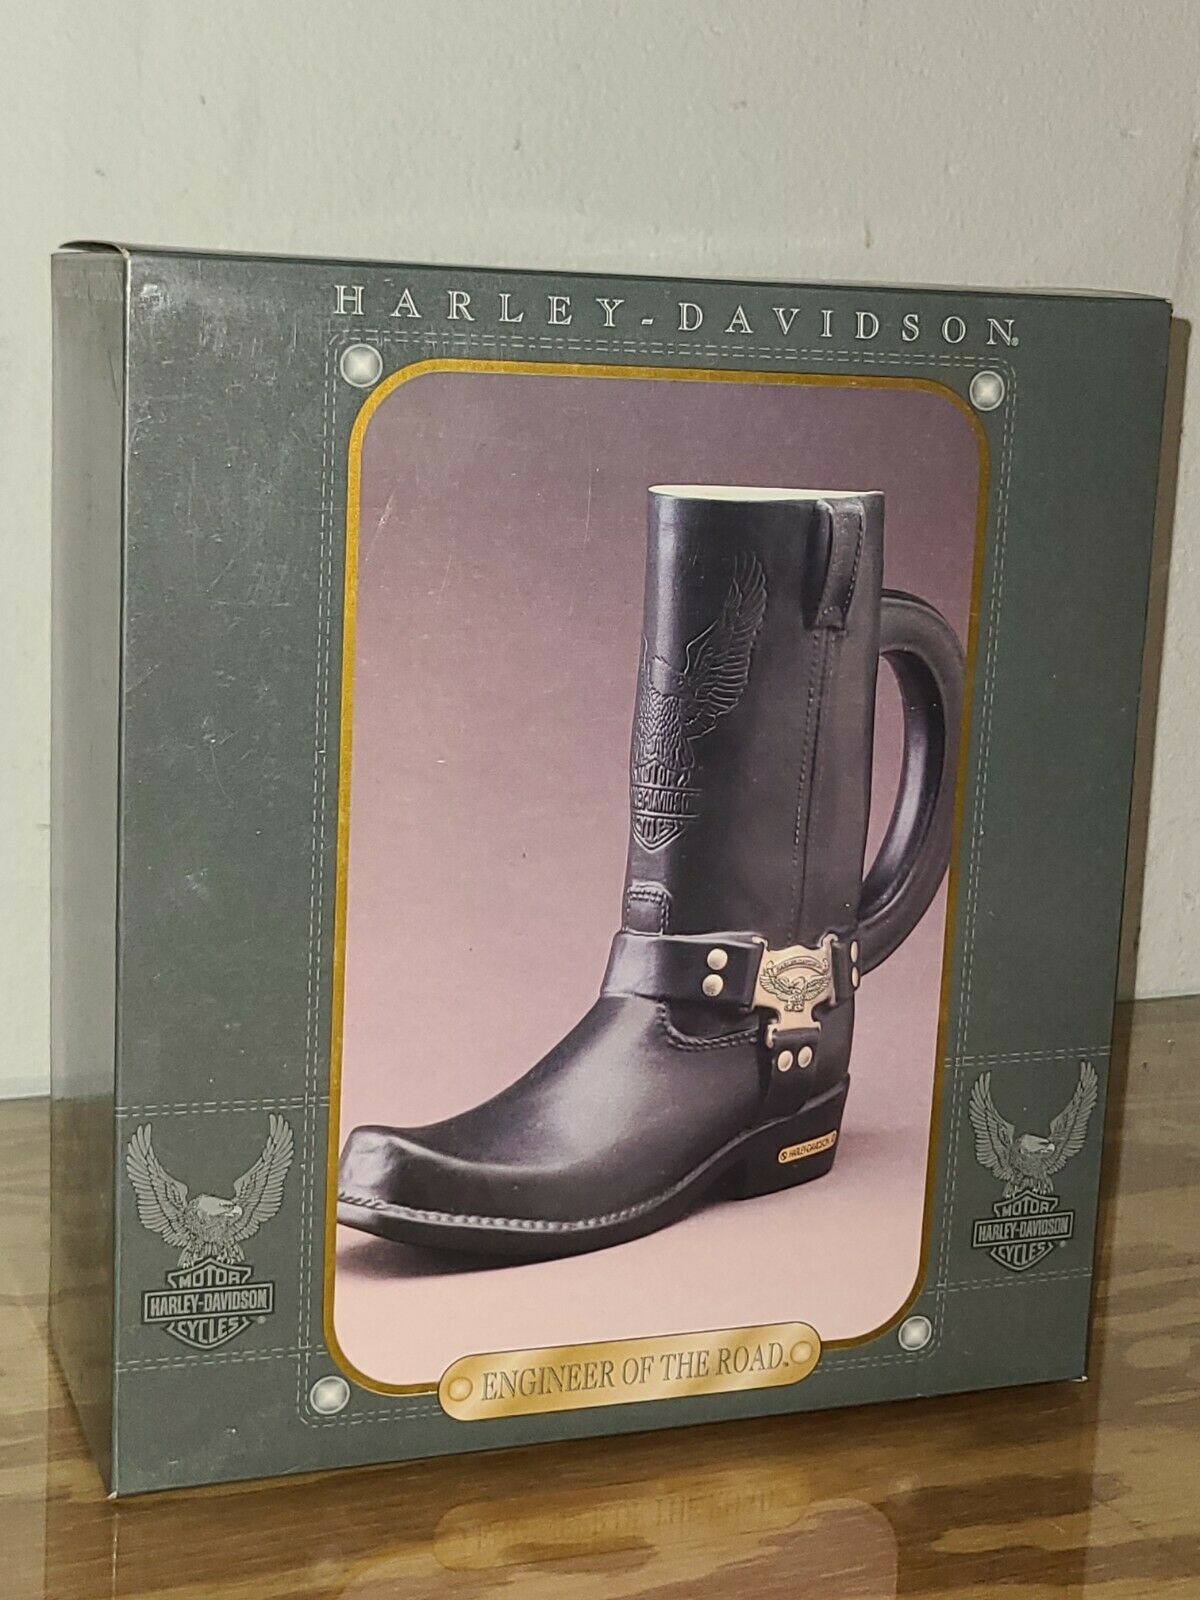 Harley-Davidson Black Boot Stein Mug Engineer of the Road Special Edition 1998